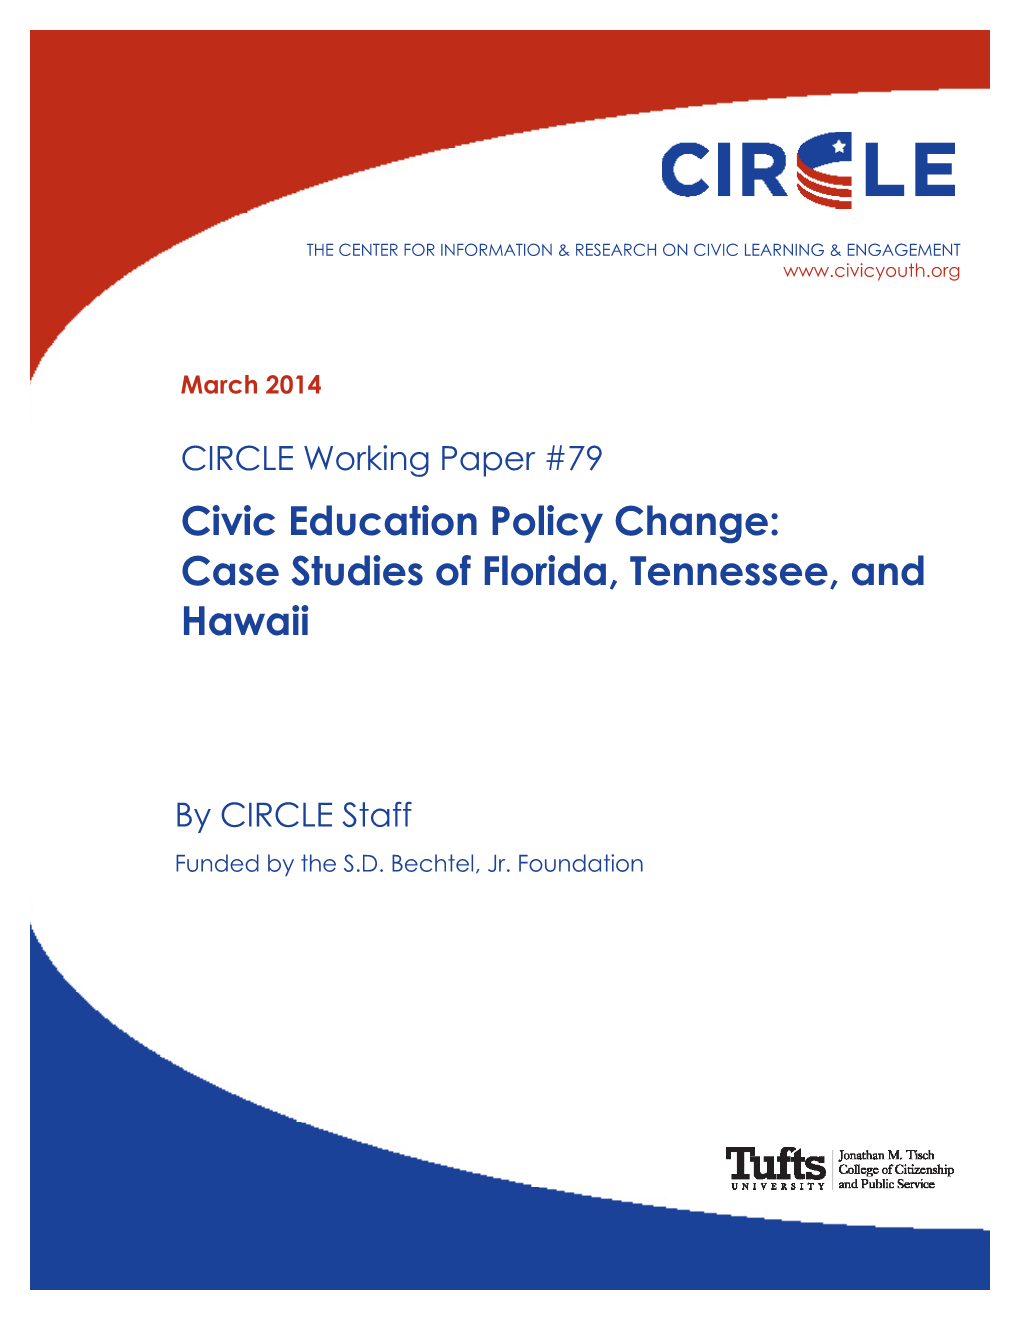 Civic Education Policy Change: Case Studies of Florida, Tennessee, and Hawaii